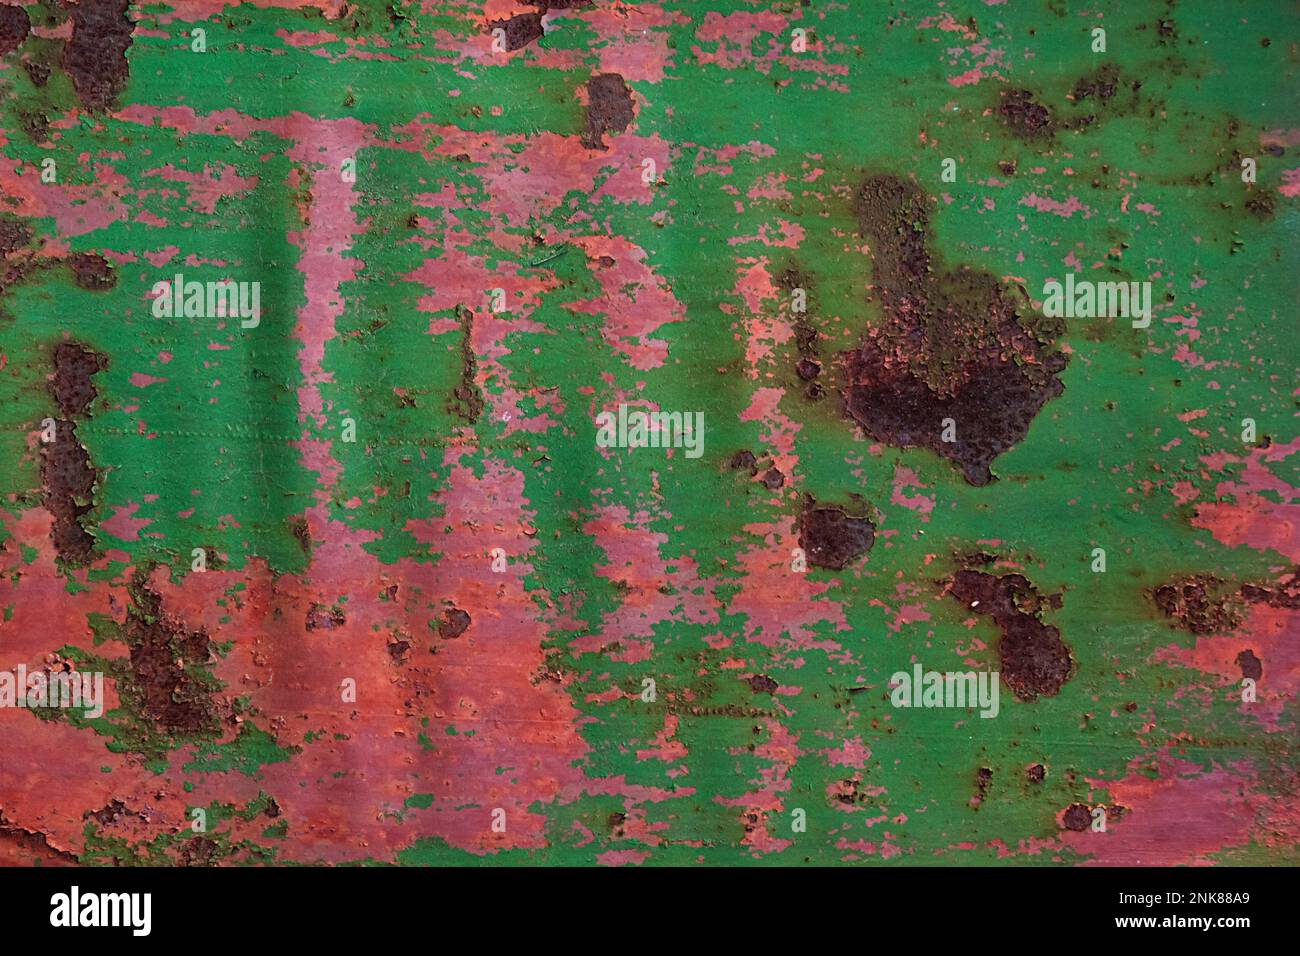 Grunge rusted metal texture, covered with old colored paint, rust and oxidized metal background. Old metal iron panel Stock Photo